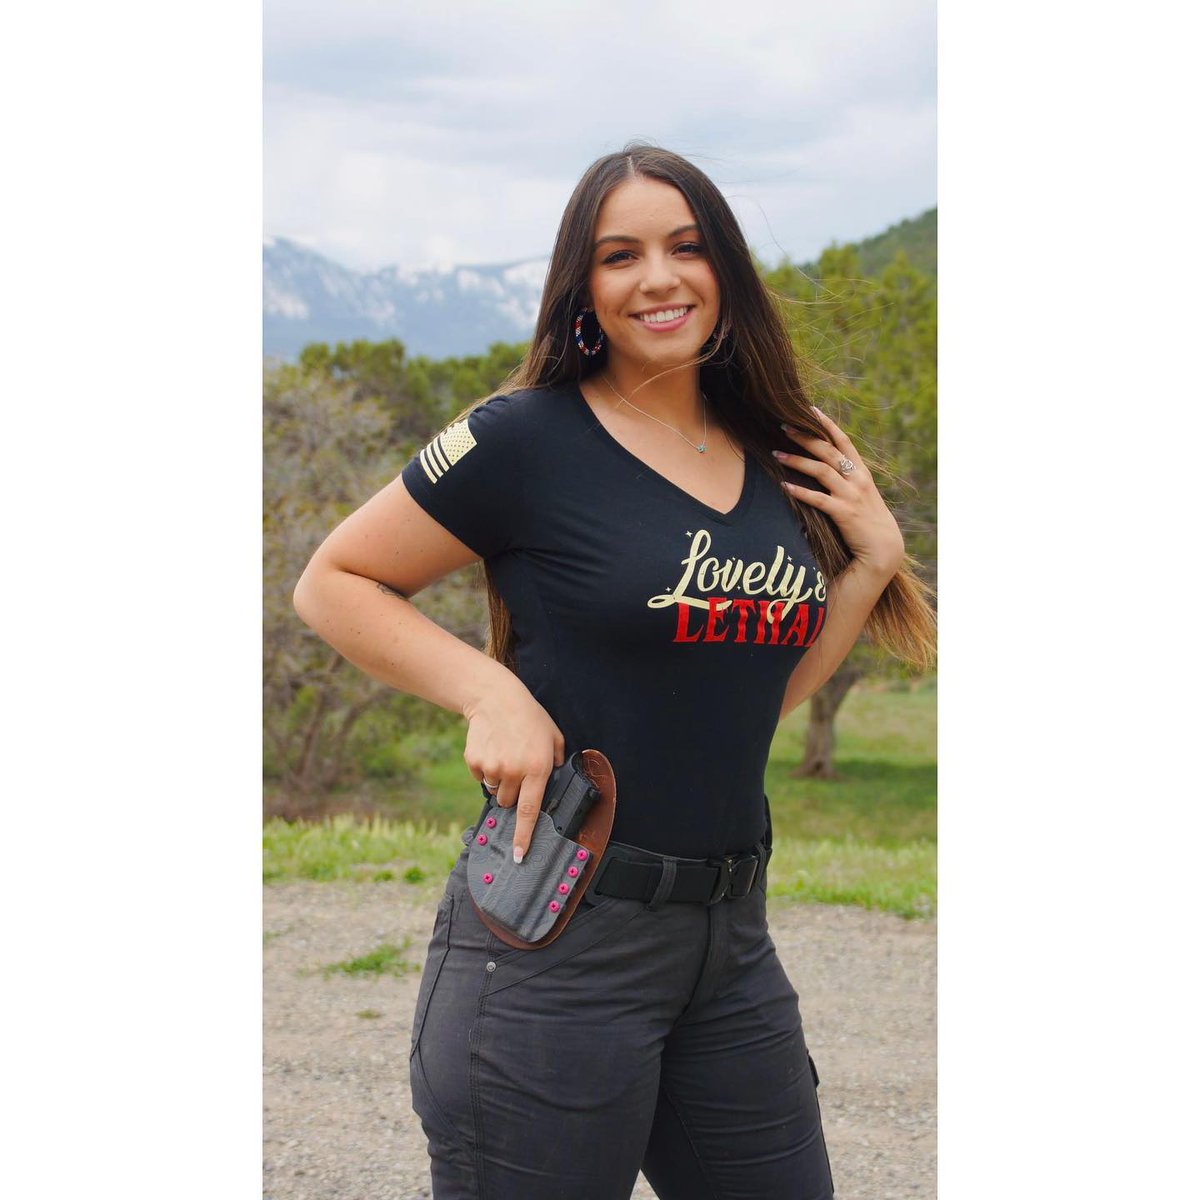 Huge shoutout to all of our Influencers/Ambassadors rocking the Grunt Style Lifestyle everyday!!!

gruntstyle.com

#gruntstyle #america #ambassadors #influencers #gaming #callofduty #perfectlyflawed #guns #Freedom #bacon #whiskey